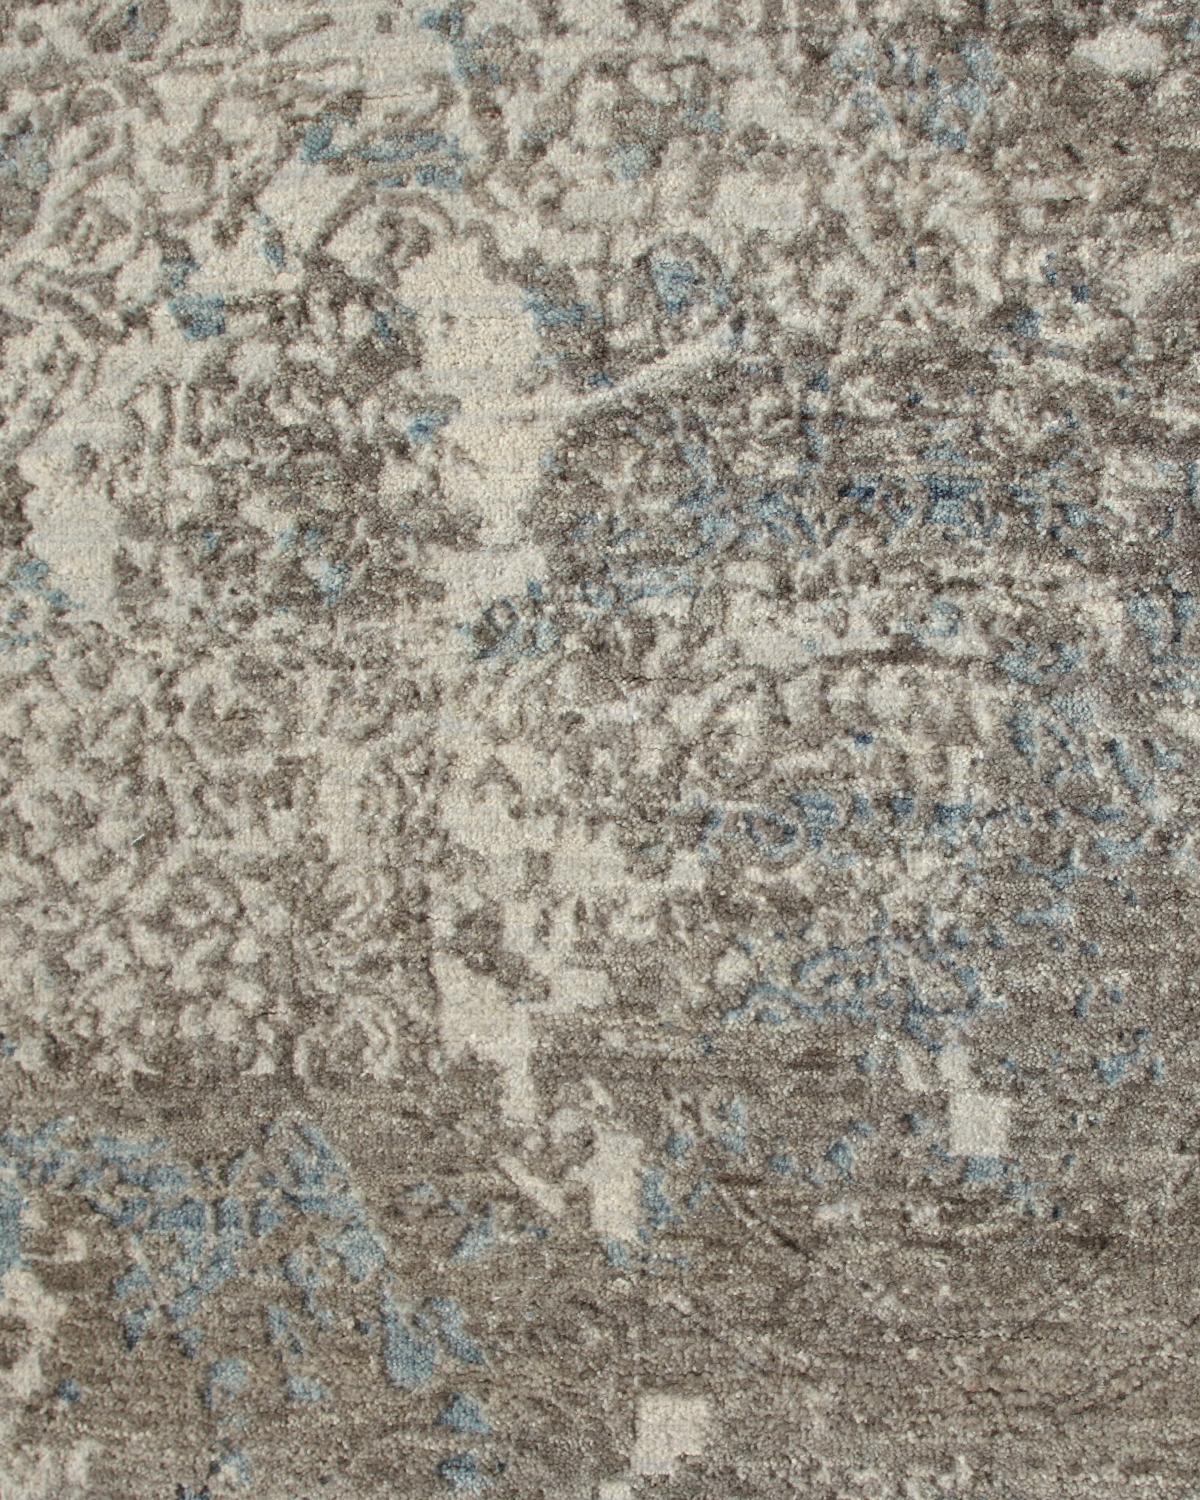 Indian One-of-a-Kind Modern Wool Cotton Blend Hand-Knotted Area Rug, Taupe, 8'1 x 9'10